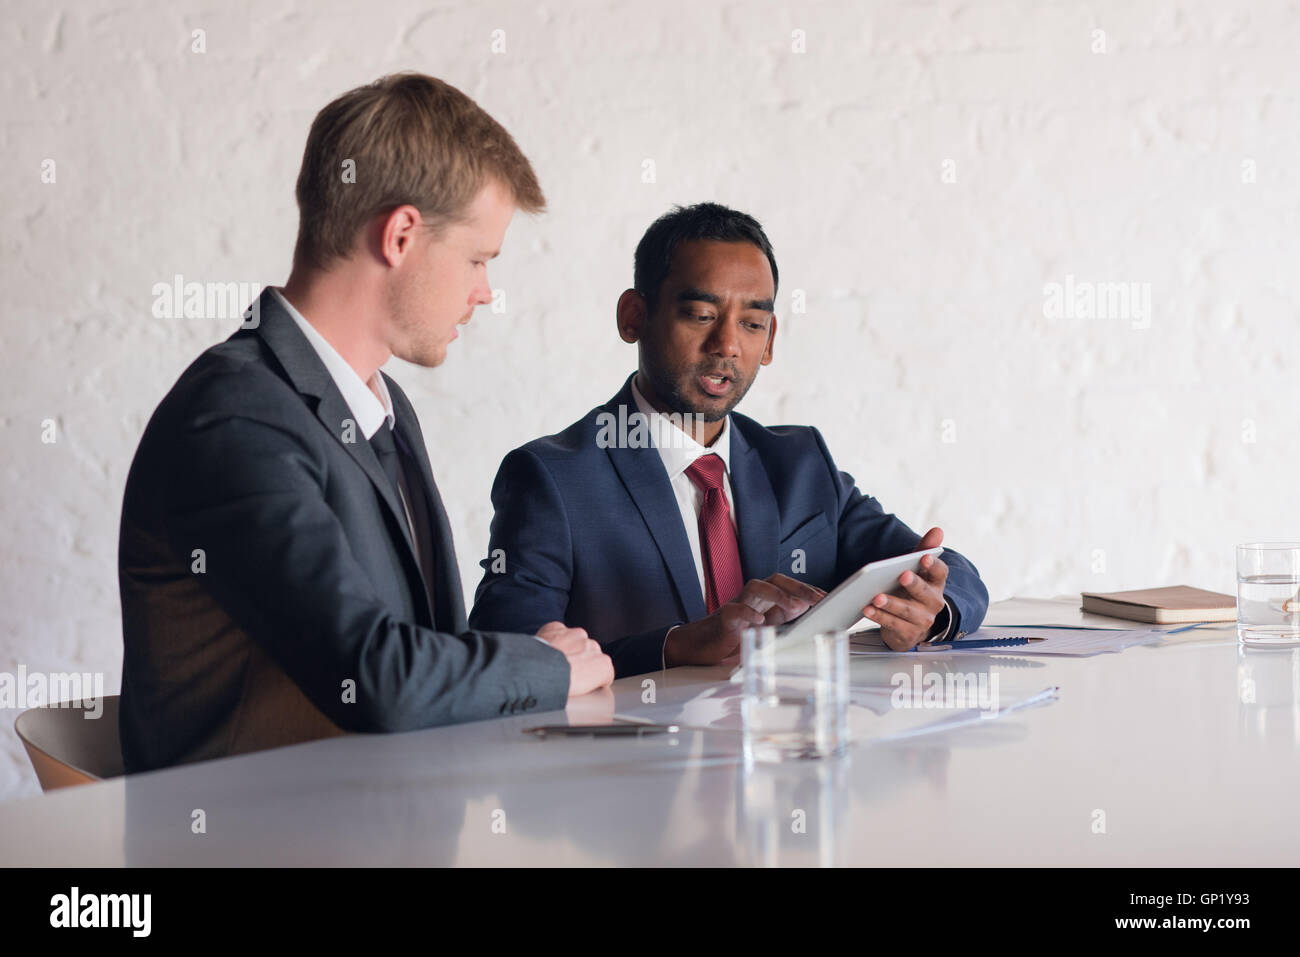 Modern business in the boardroom Stock Photo